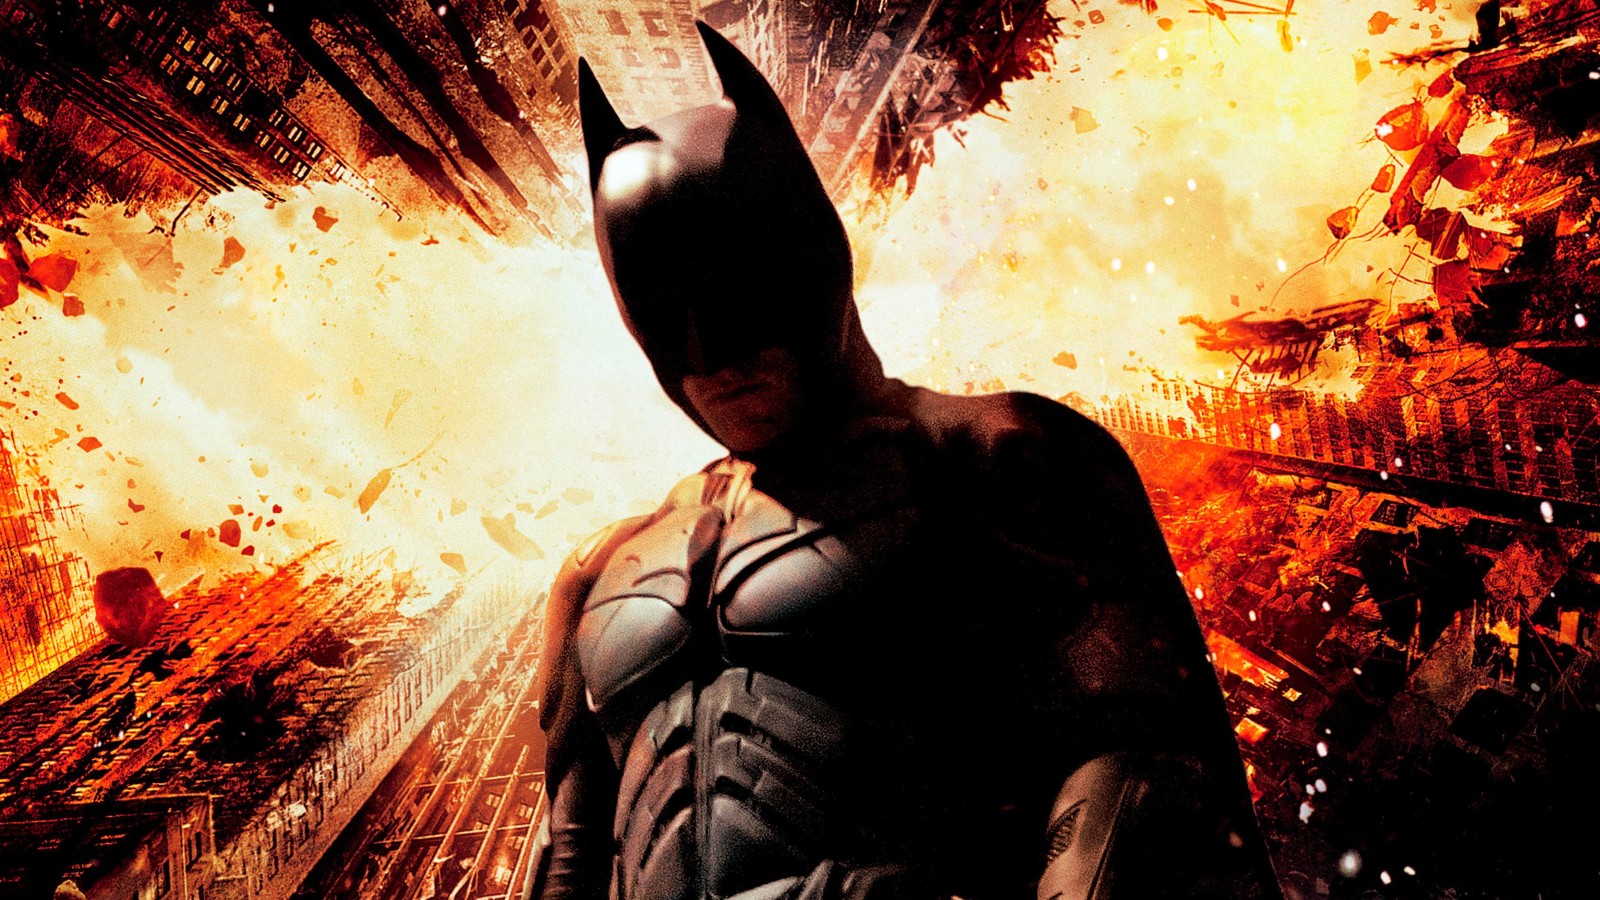 Today's big release: The Dark Knight Rises ends the Batman trilogy